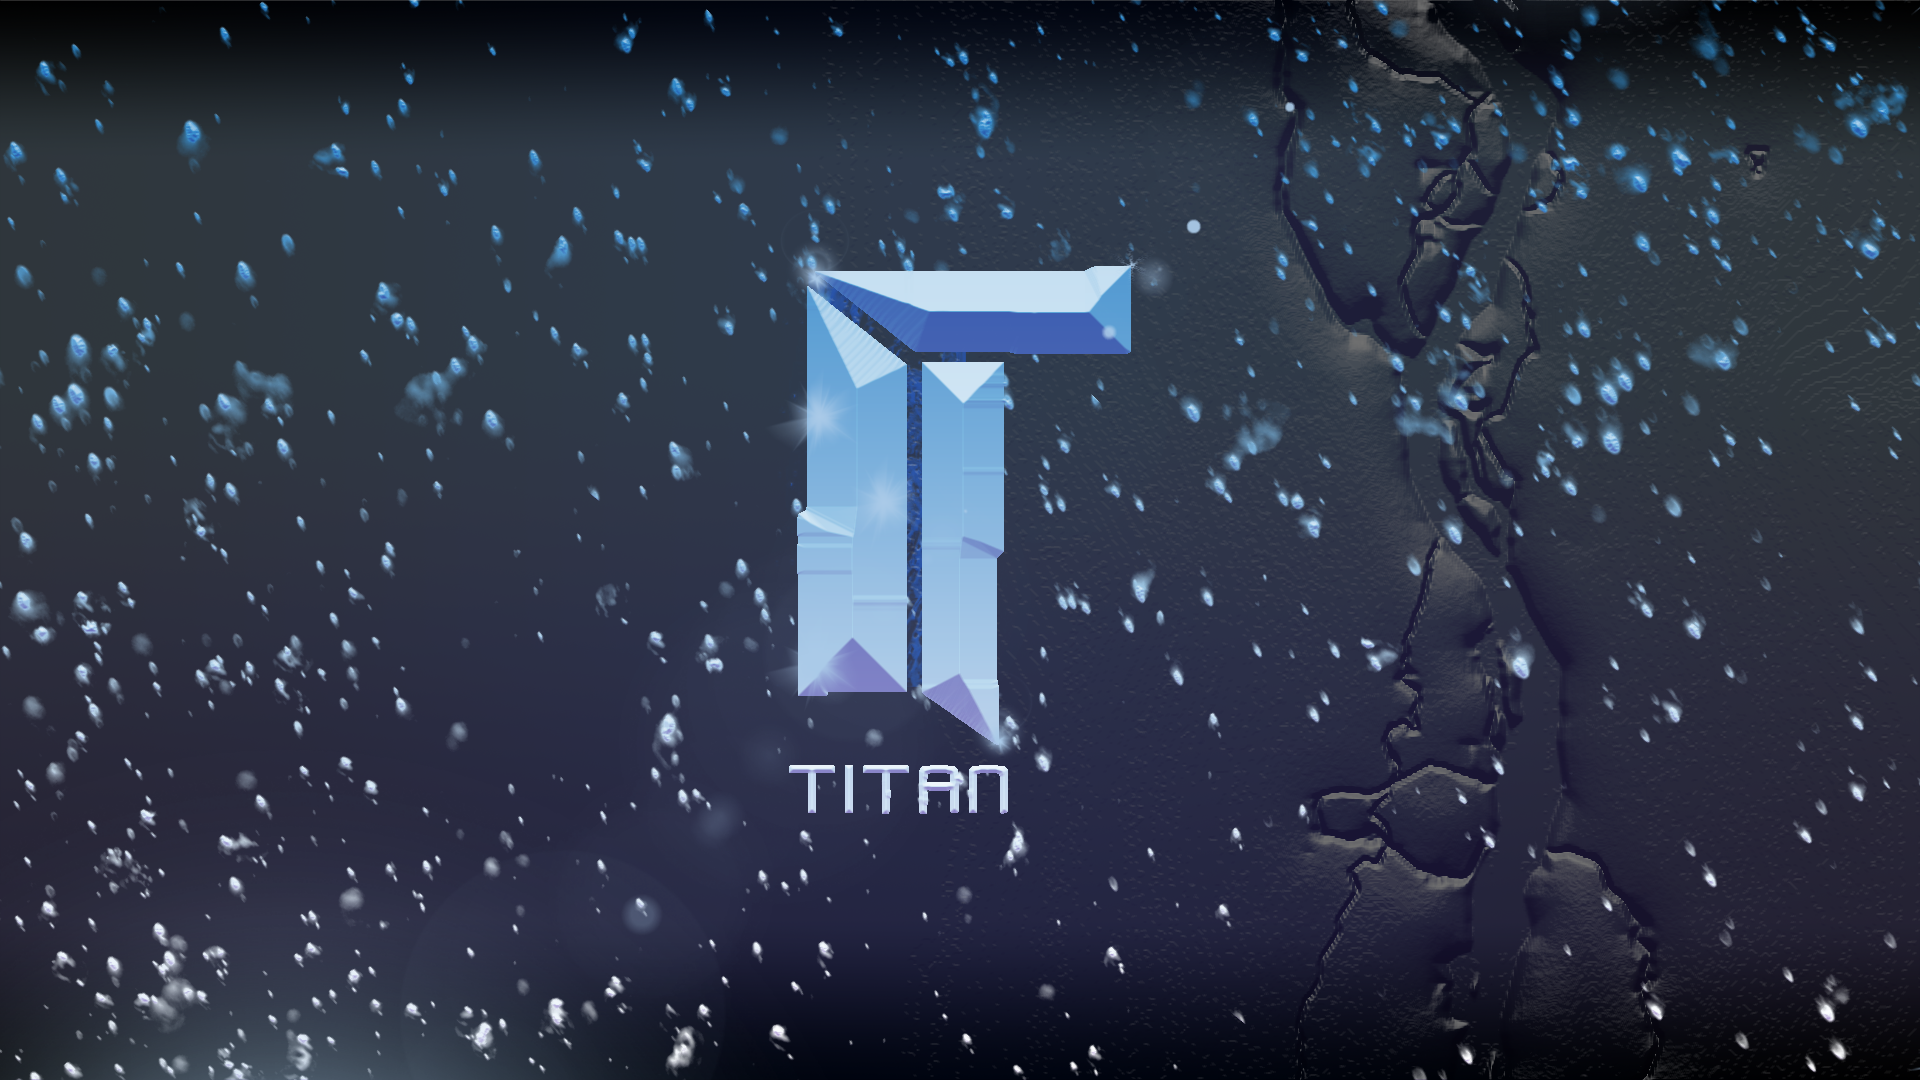 A Titan Wallpaper I Made When Was Still New To Photoshop